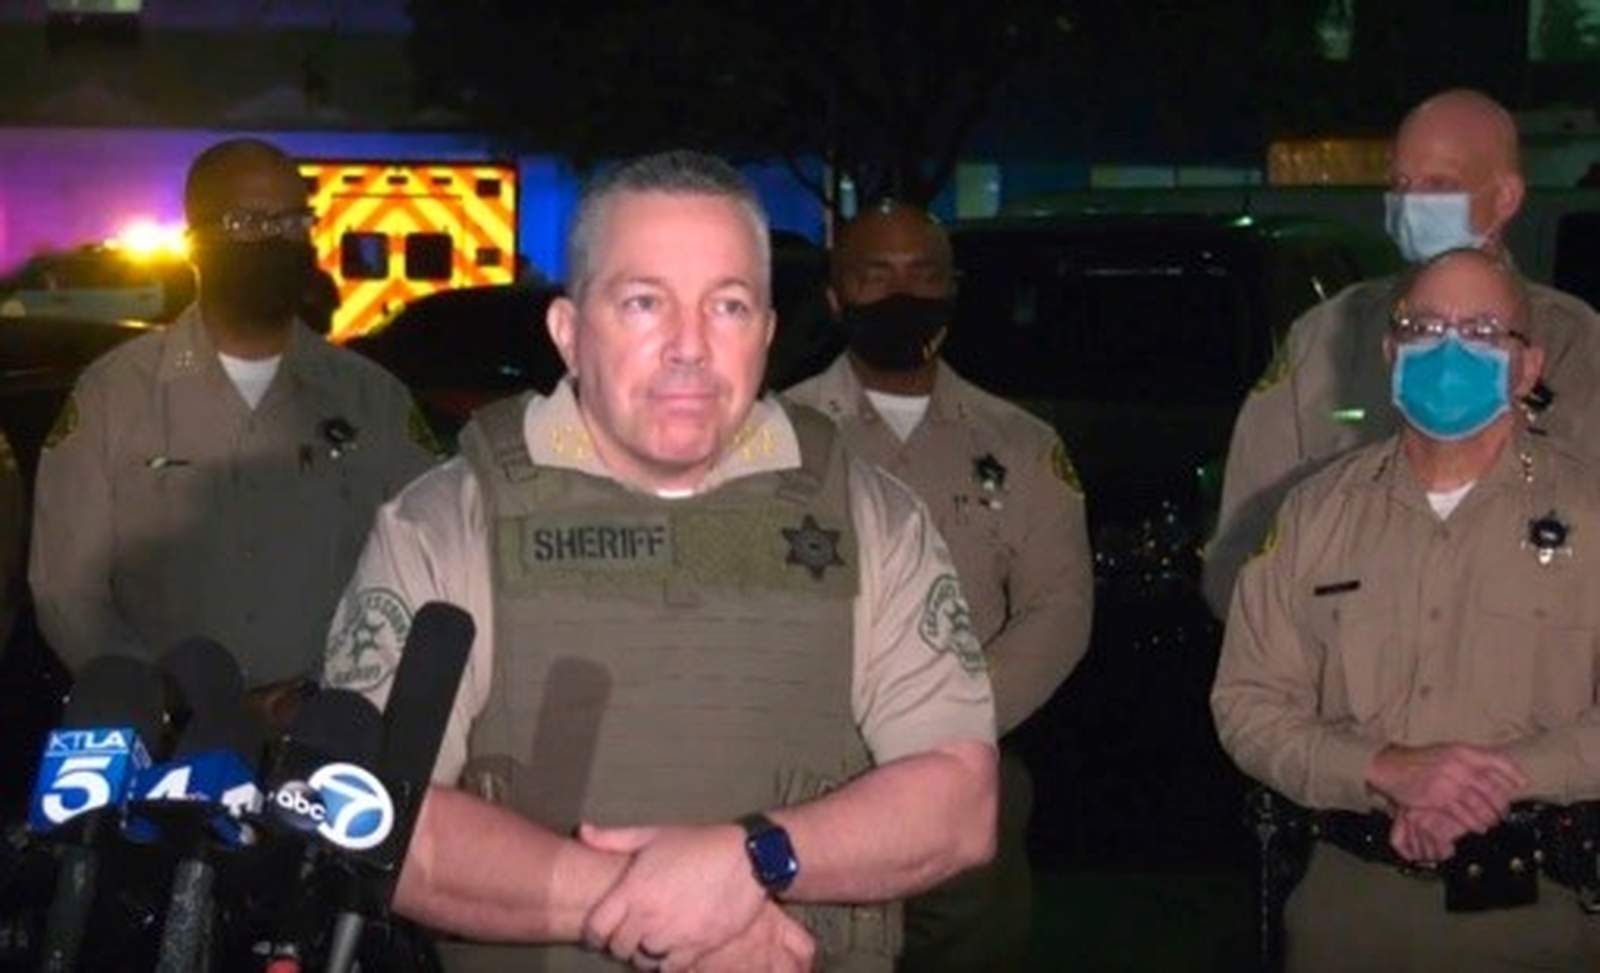 LA Sheriff to politicians: emphasize trust in justice system